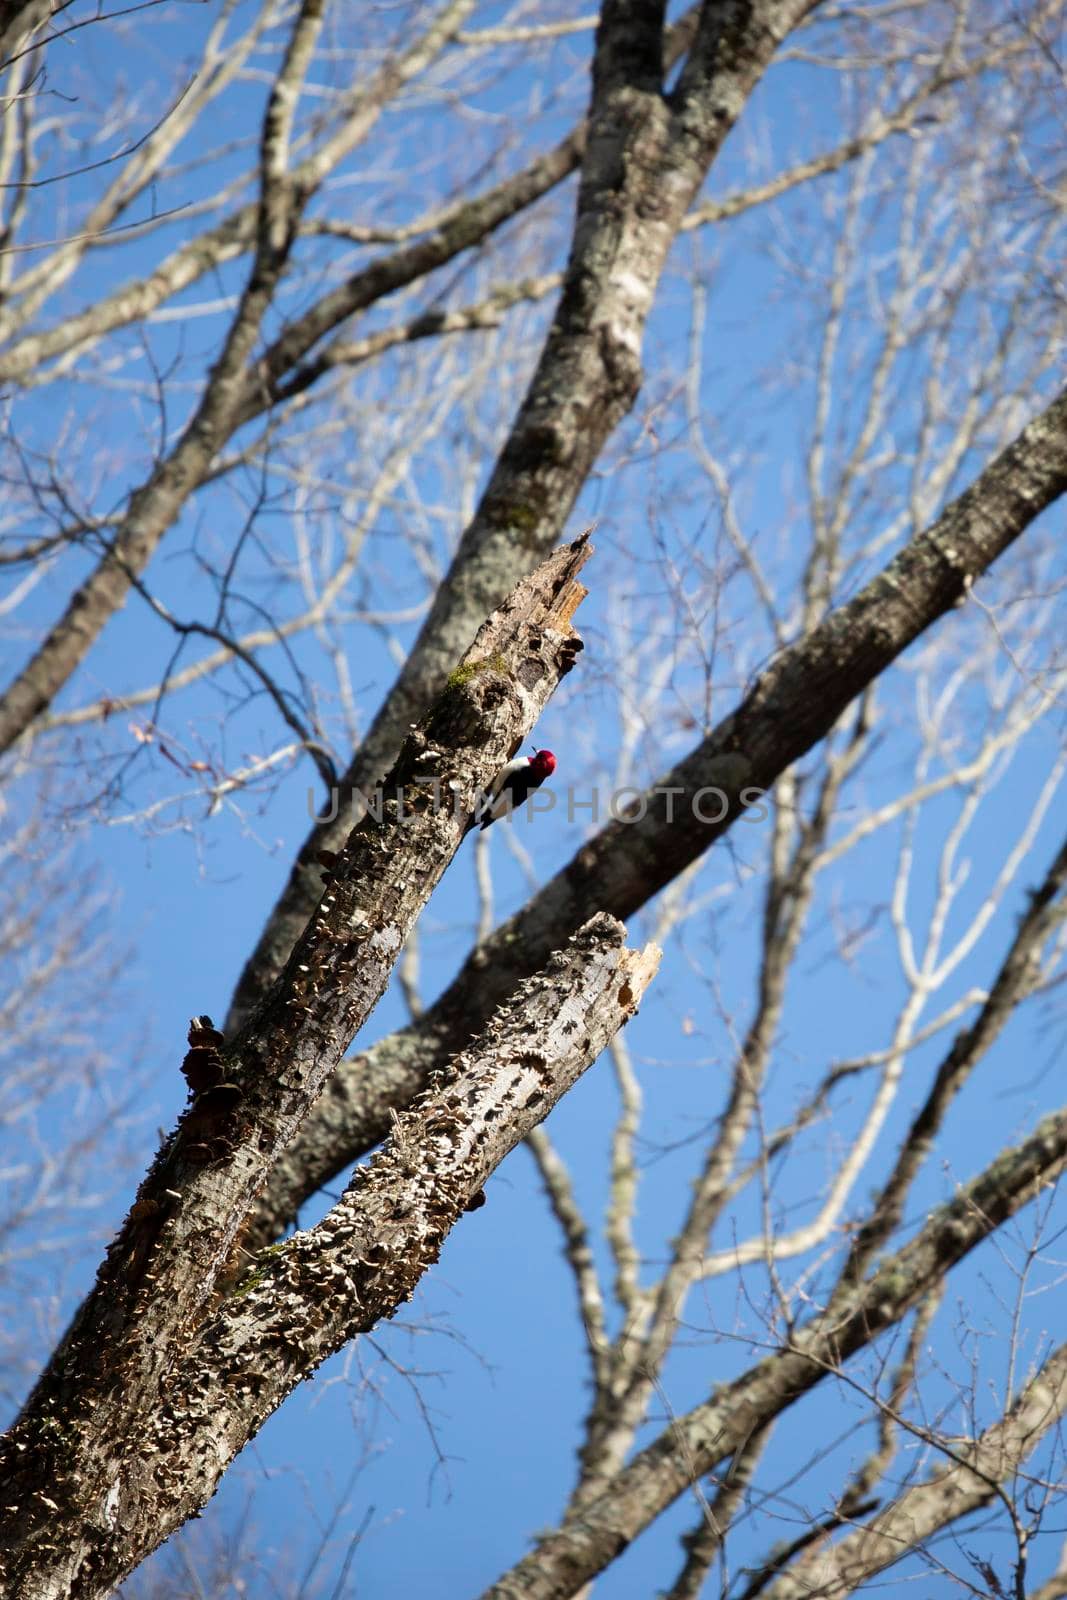 Adult Redheaded Woodpecker and Nesting Cavity by tornado98